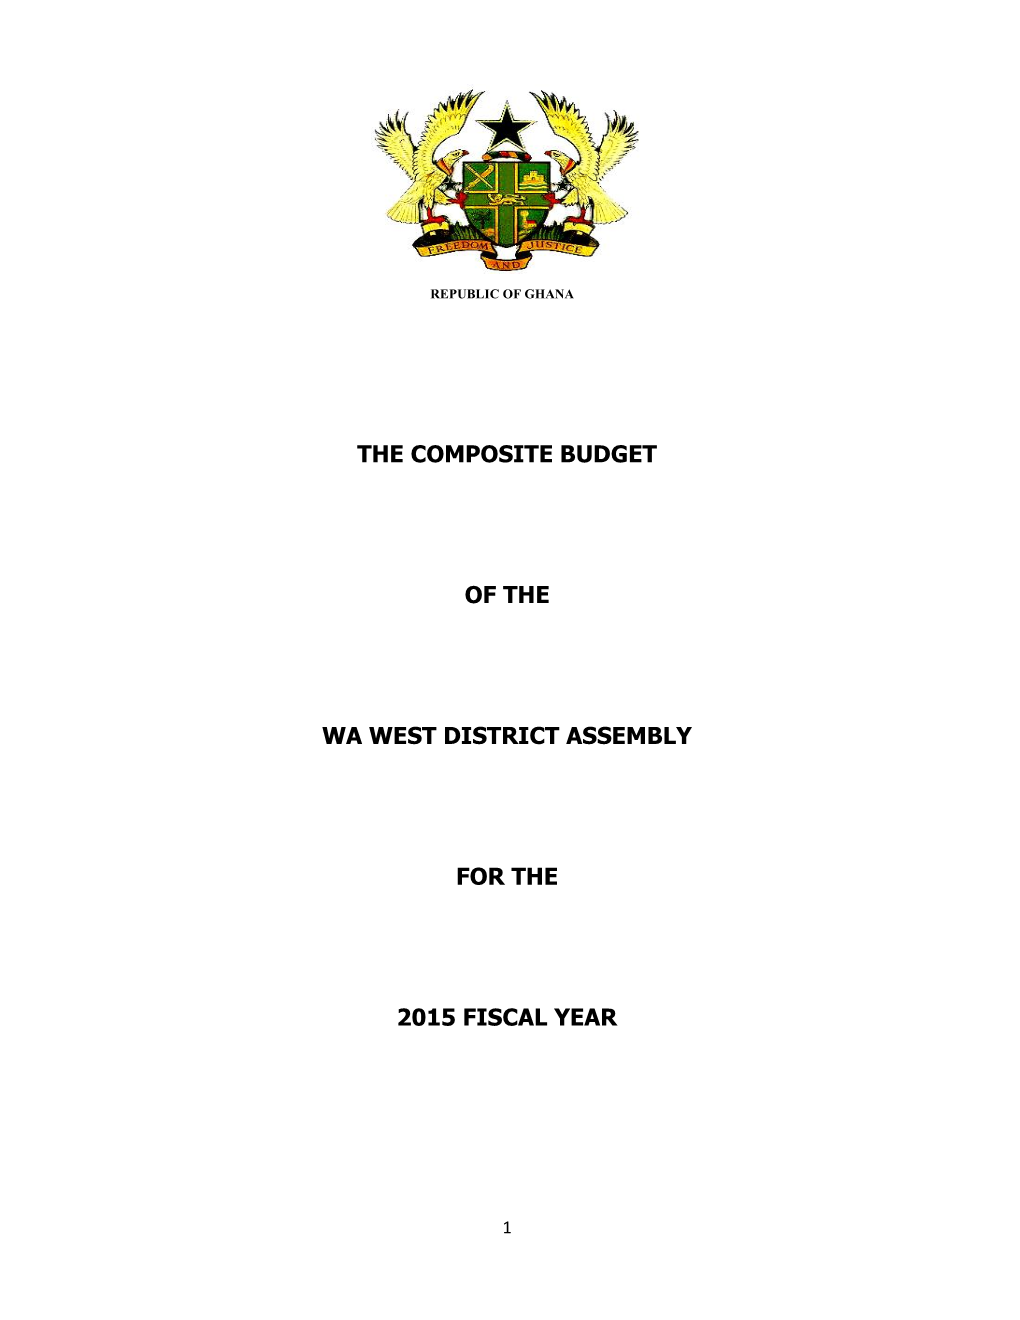 The Composite Budget of the Wa West District Assembly for the 2015 Fiscal